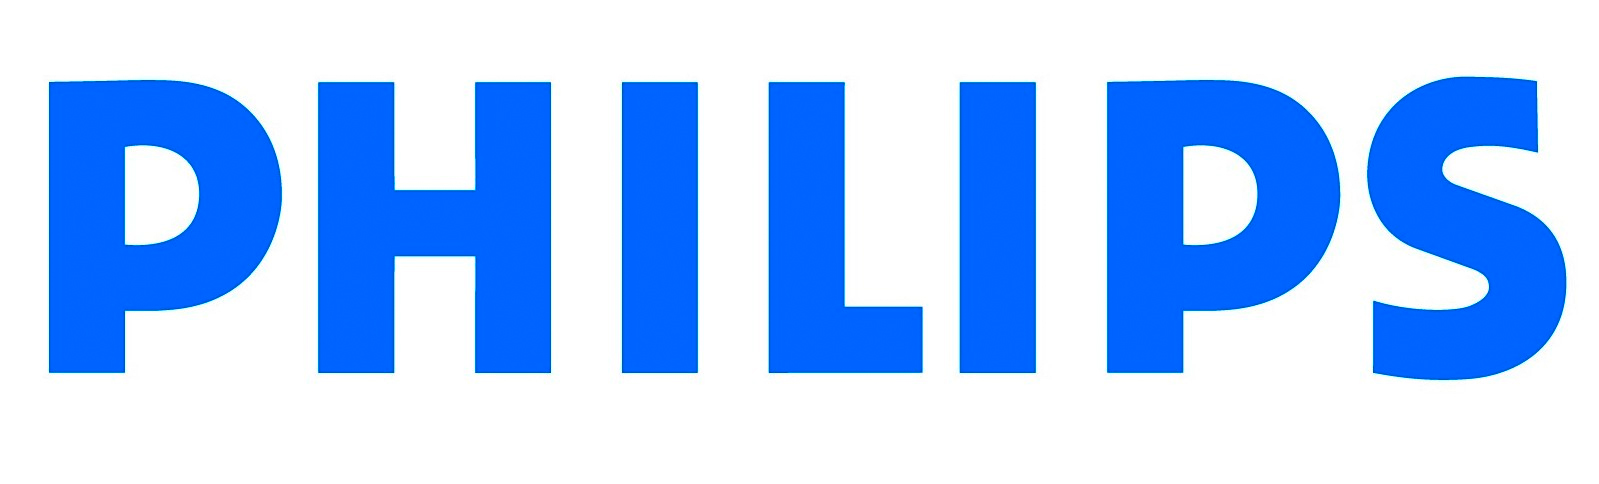 Logo of Piquee's client Philips